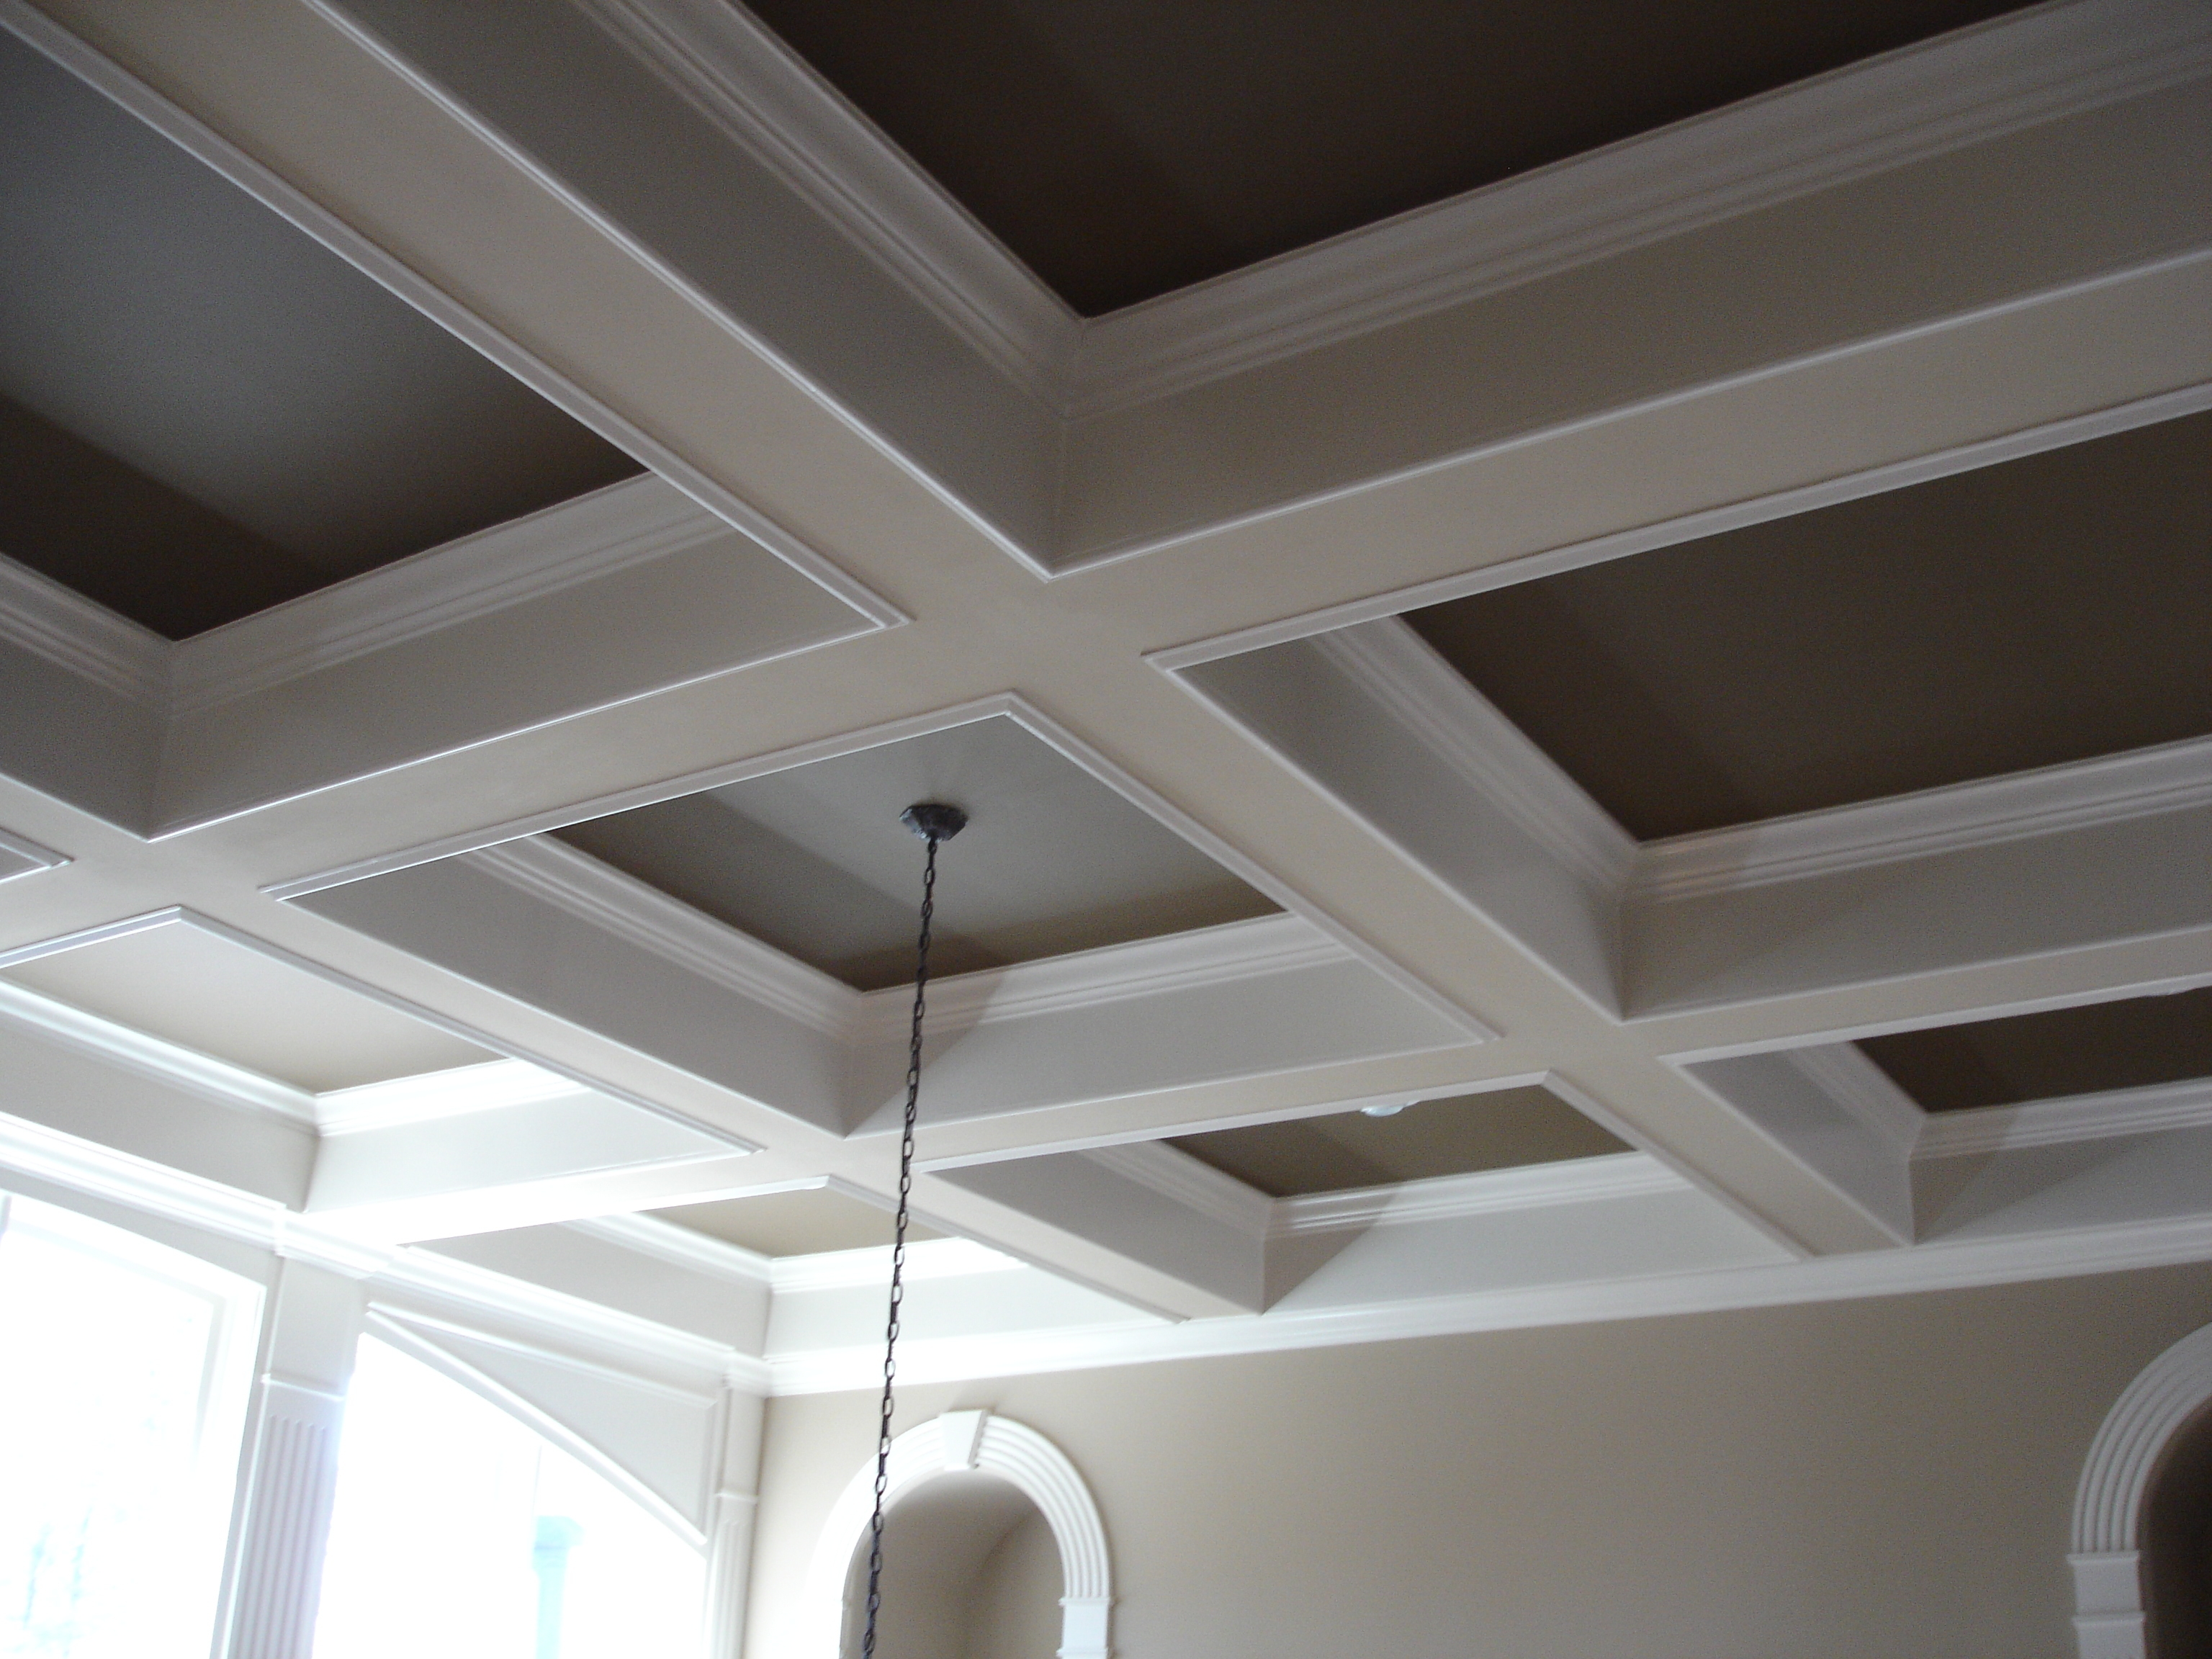 Anderson Coffered Ceiling Tiles